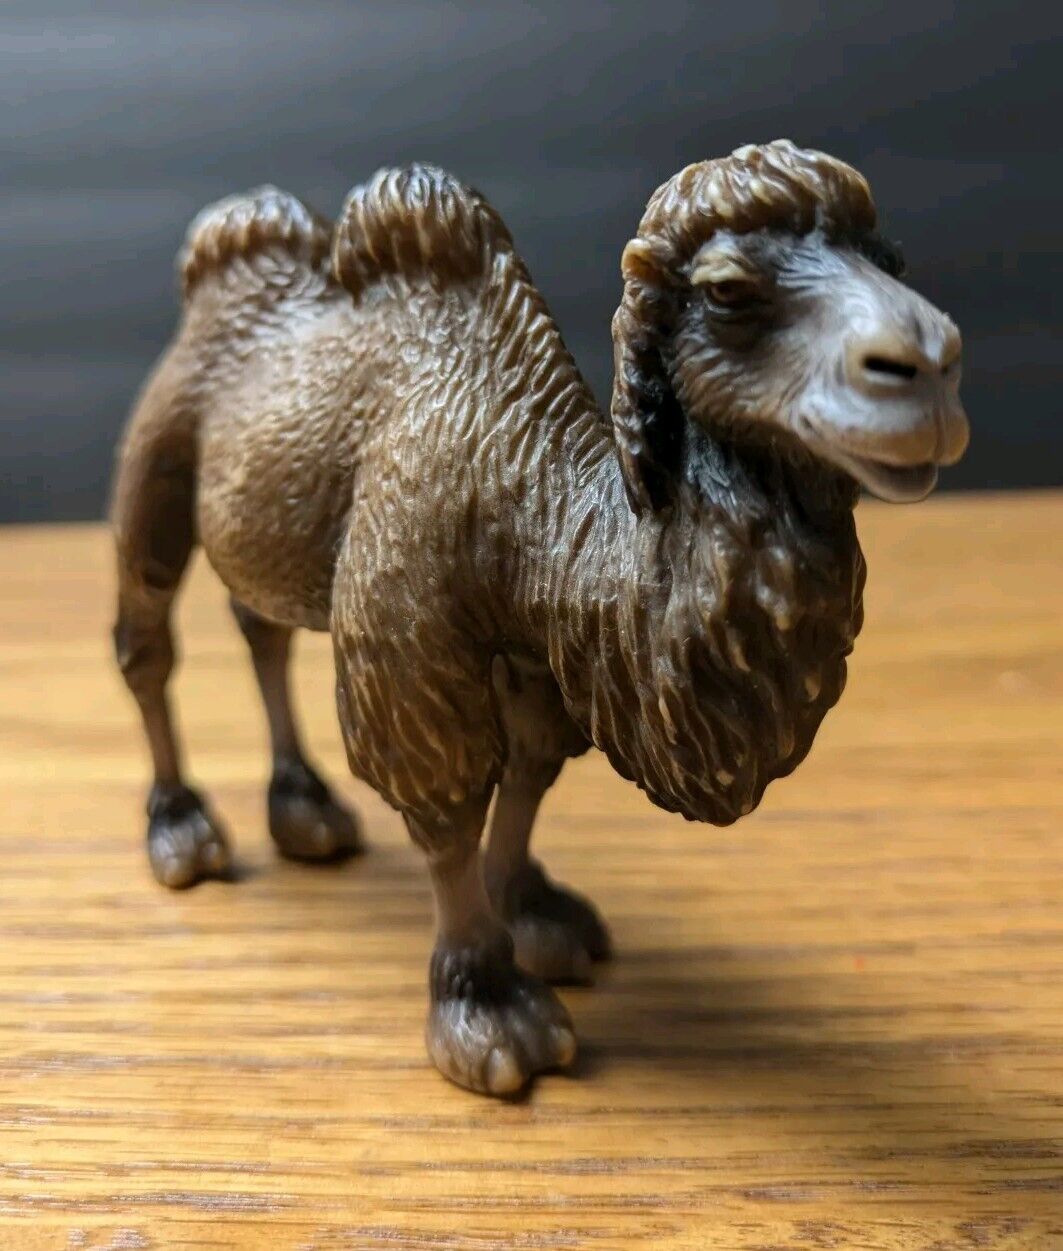 Schleich Two-Humped Bactrian Camel 2004 Retired Figurine D-73527. P1